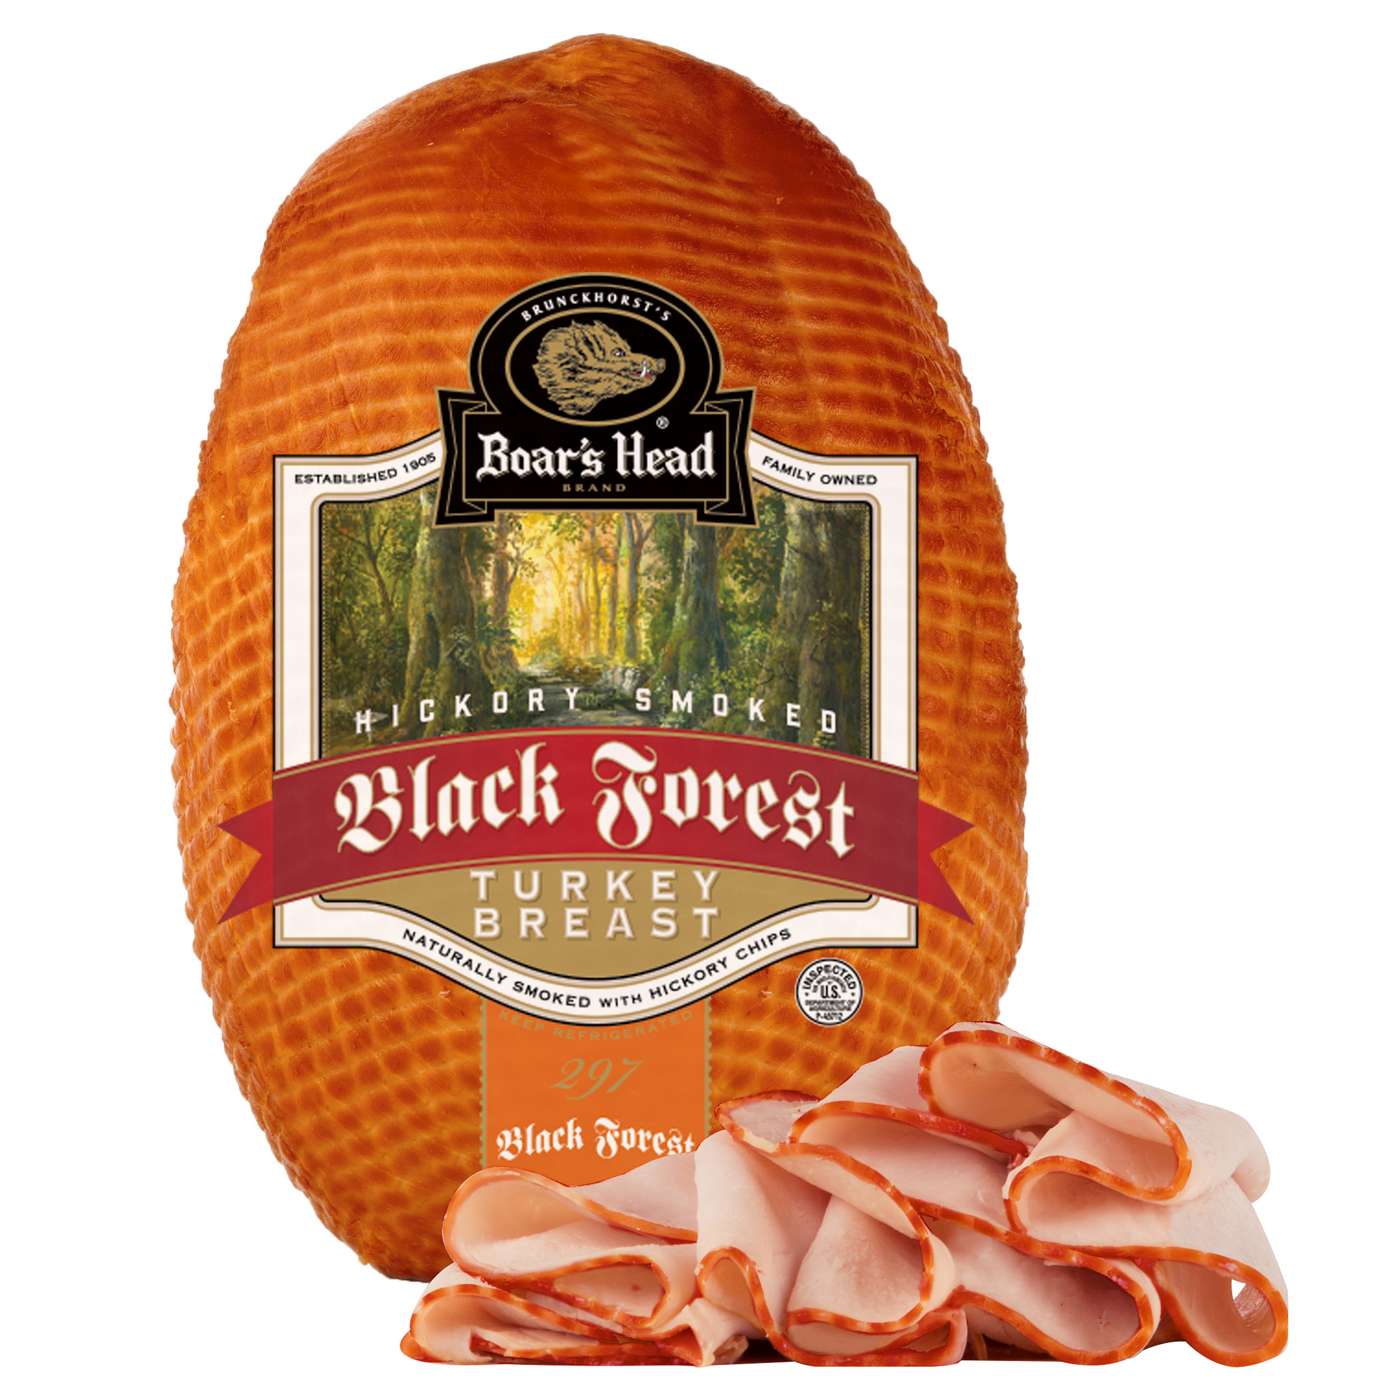 Boar's Head Hickory Smoked Black Forest Turkey Breast, Sliced; image 2 of 2